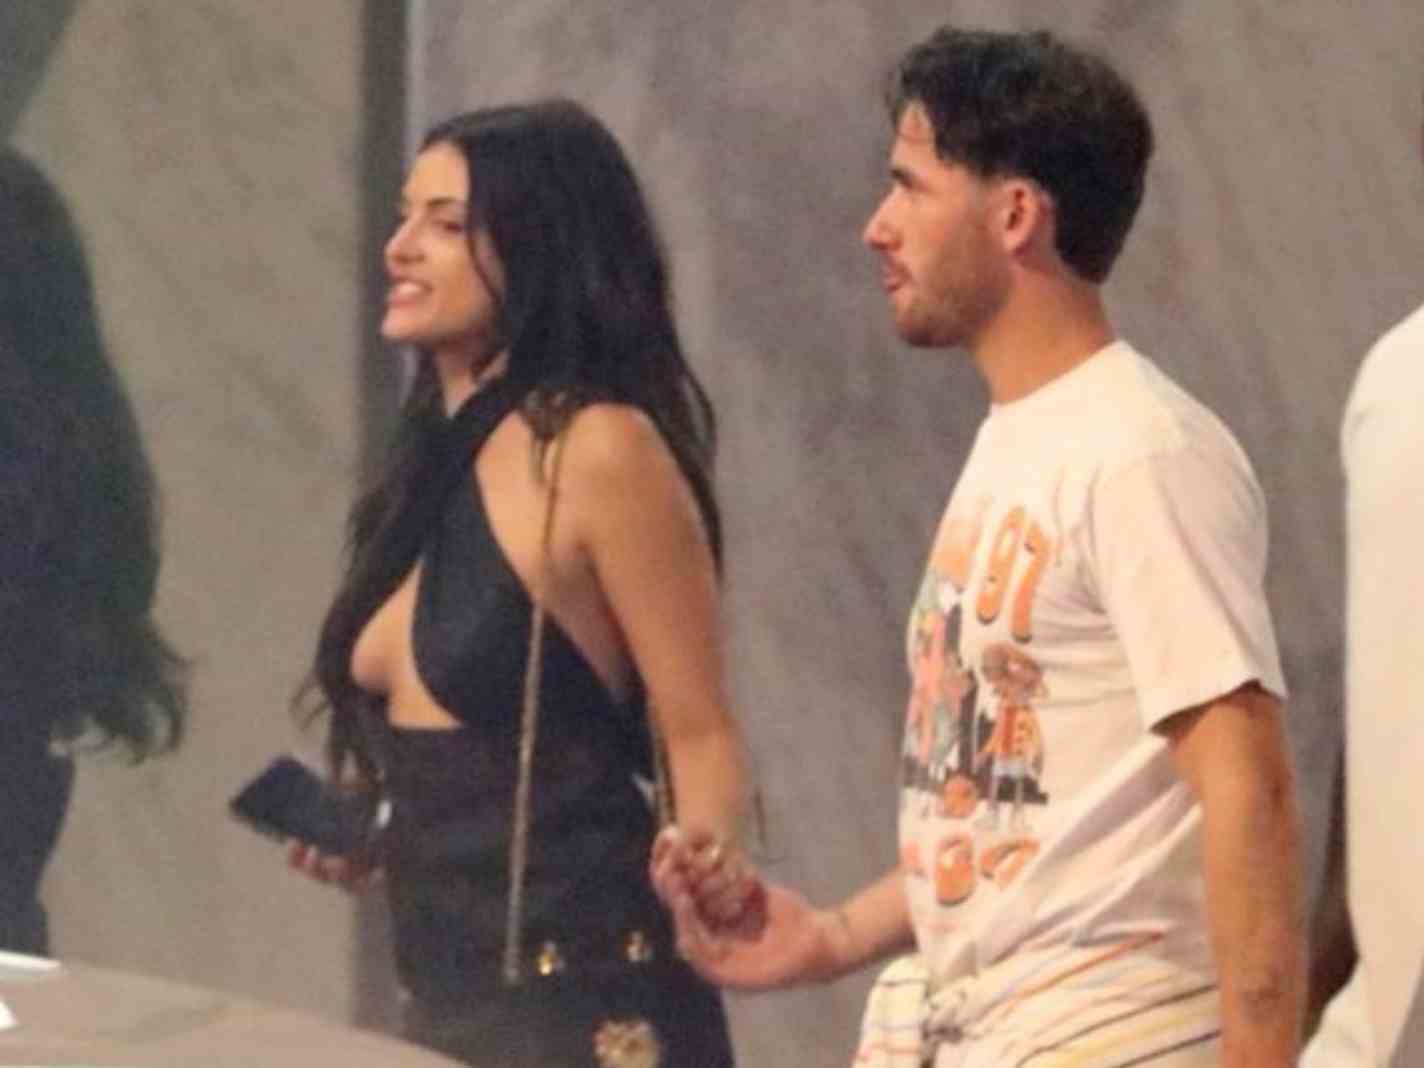 PHOTOS: Ben Chilwell  spotted going out with Netflix beauty Holly Scarfone in LA